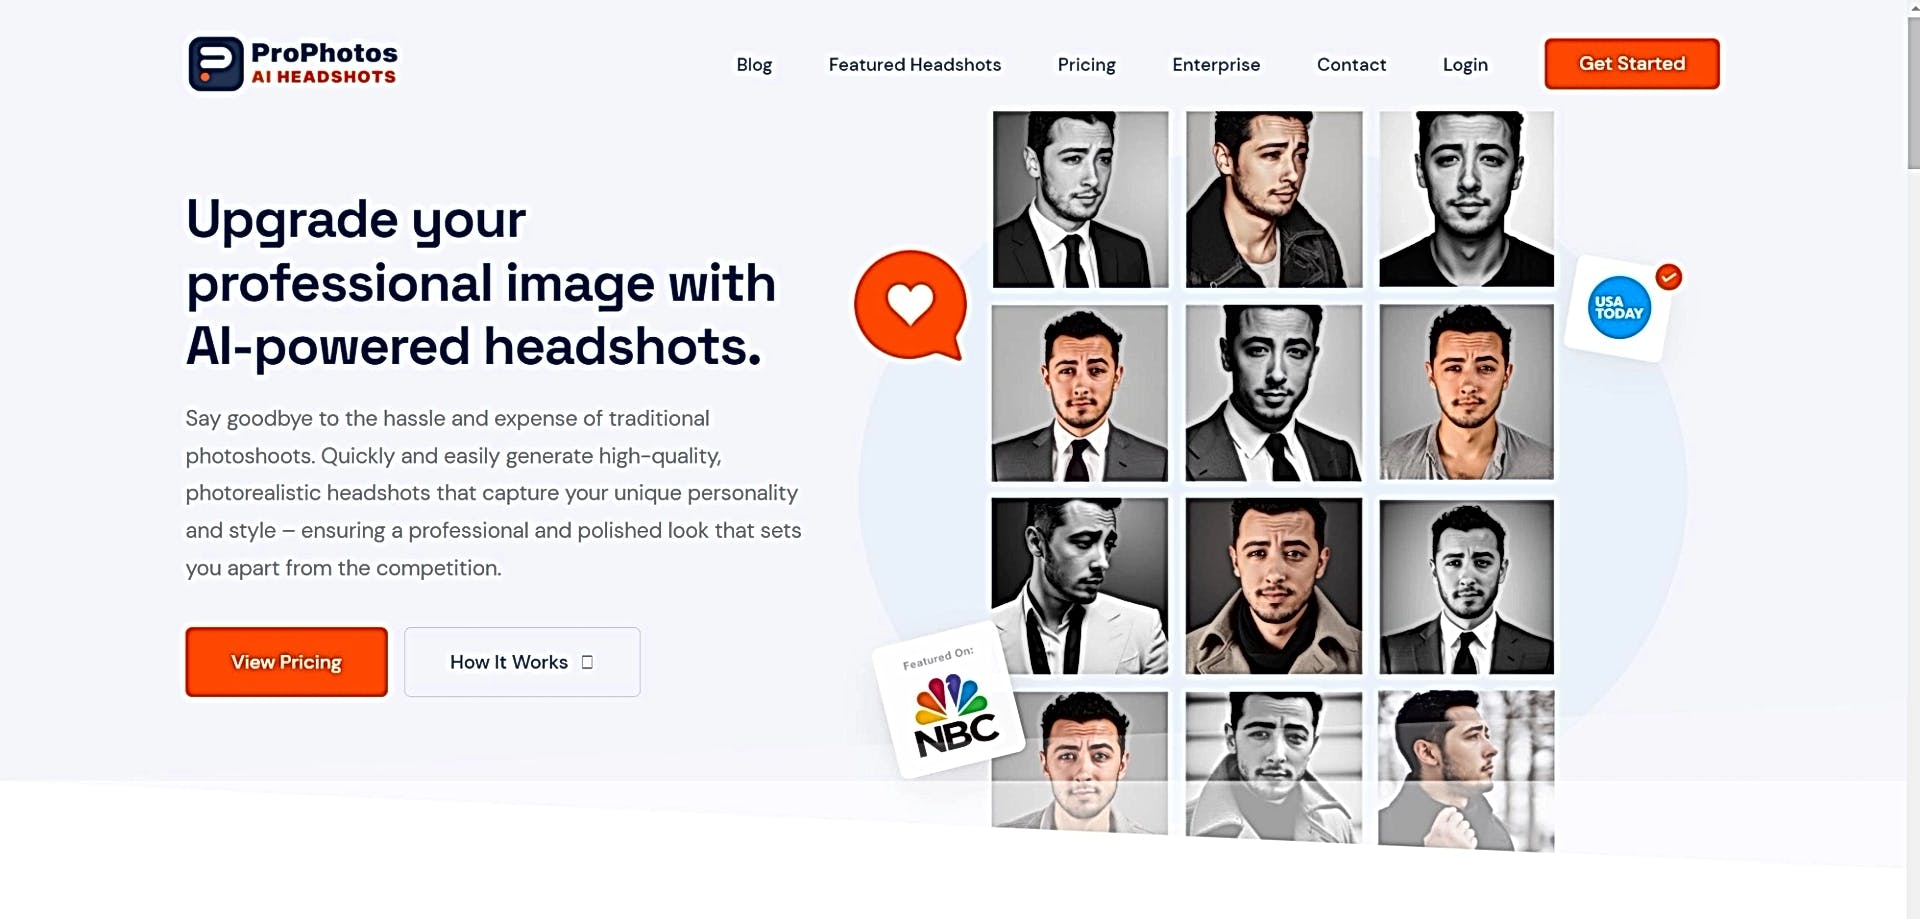 ProPhotos featured